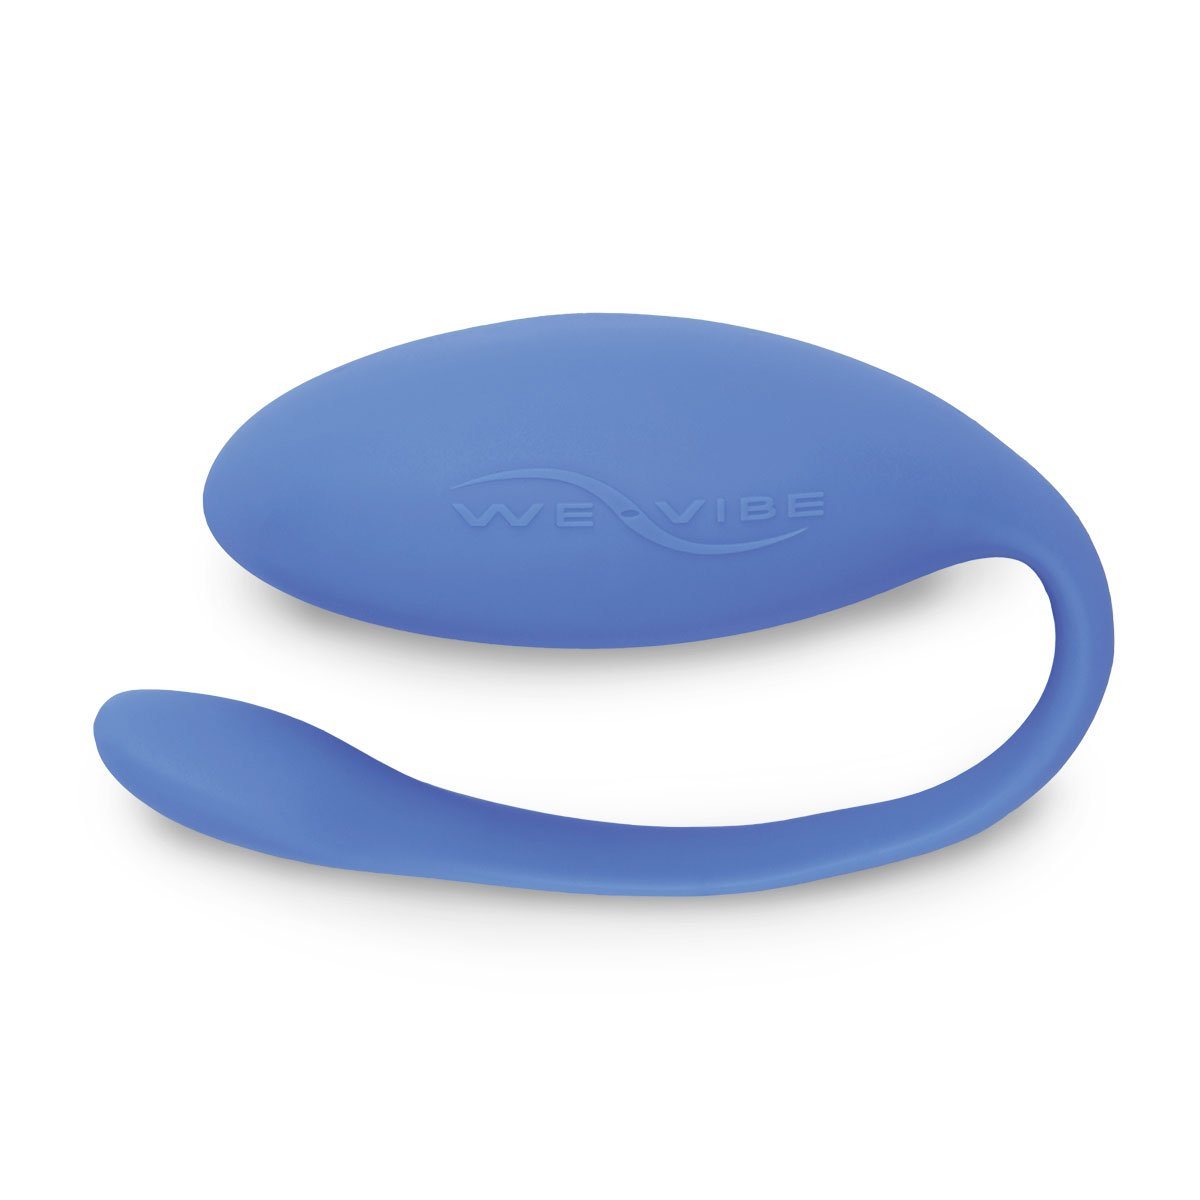 Jive By We-Vibe Silicone APP Controlled Wearable G-Spot Vibrator - Hamilton Park Electronics